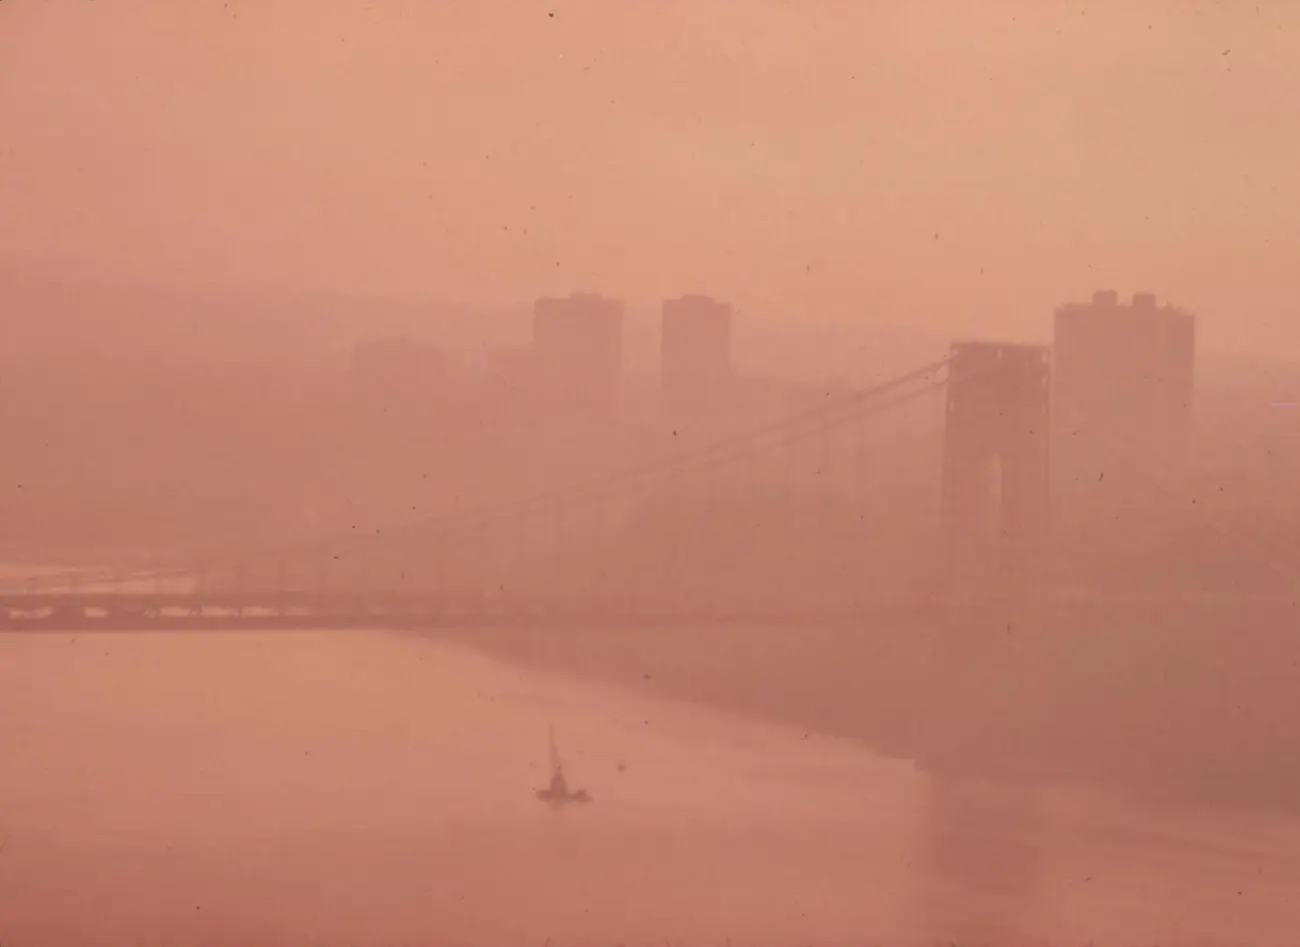 The George Washington Bridge over the Hudson River in the 1960s, before the Clean Air Act. Photo: Chester Higgins / EPA